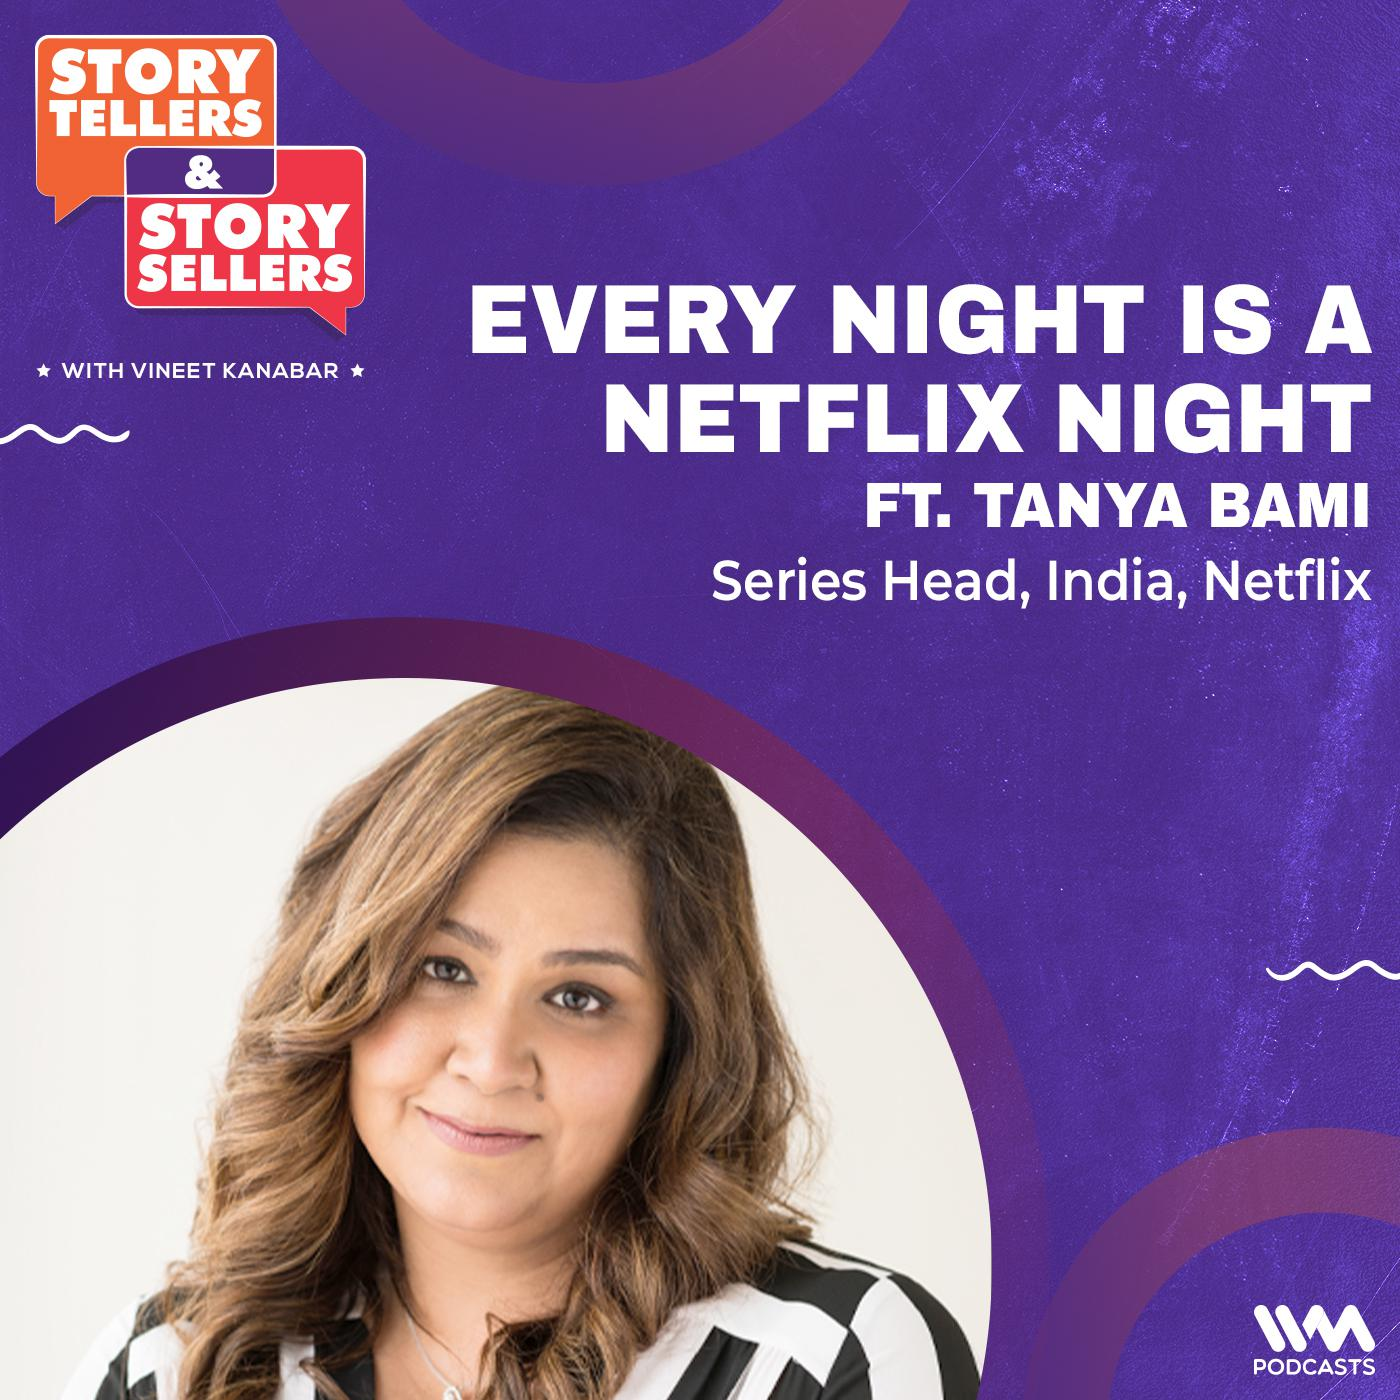 Every Night is a Netflix Night ft. Tanya Bami